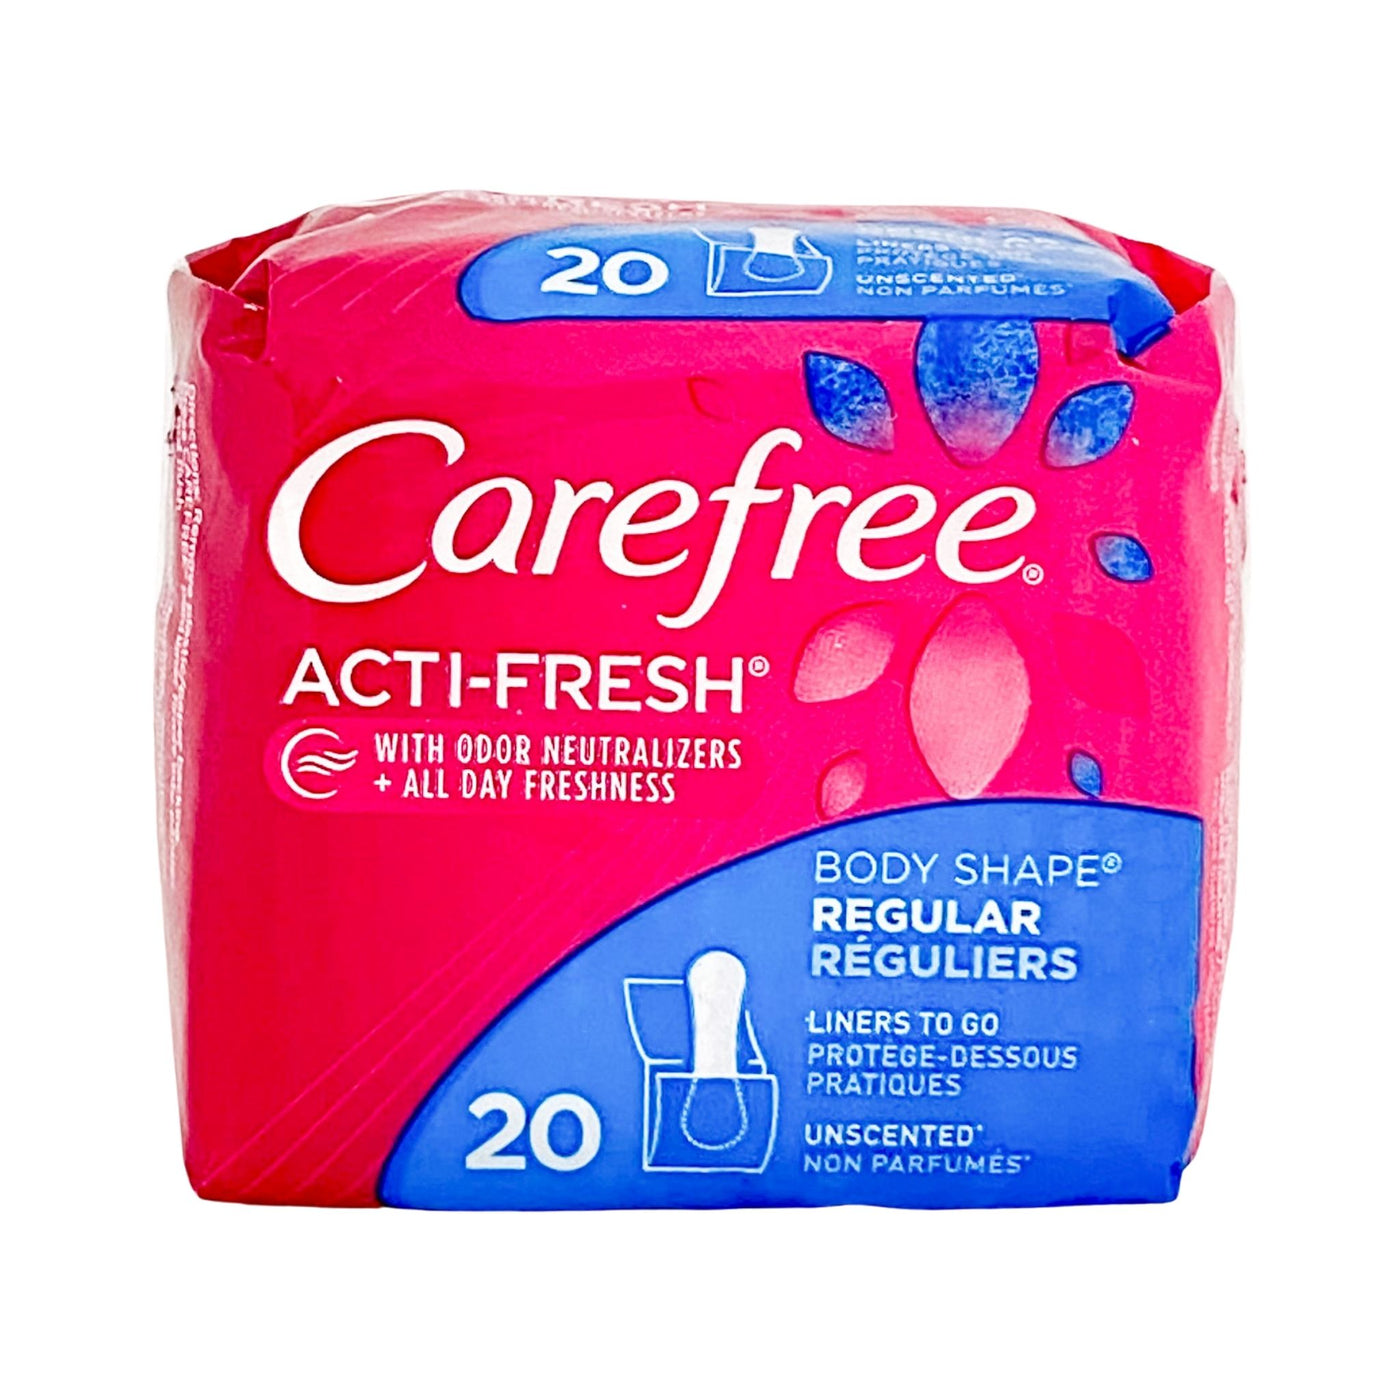 Carefree Acti-fresh 22 Perfectly Thin Unscented Daily Liners